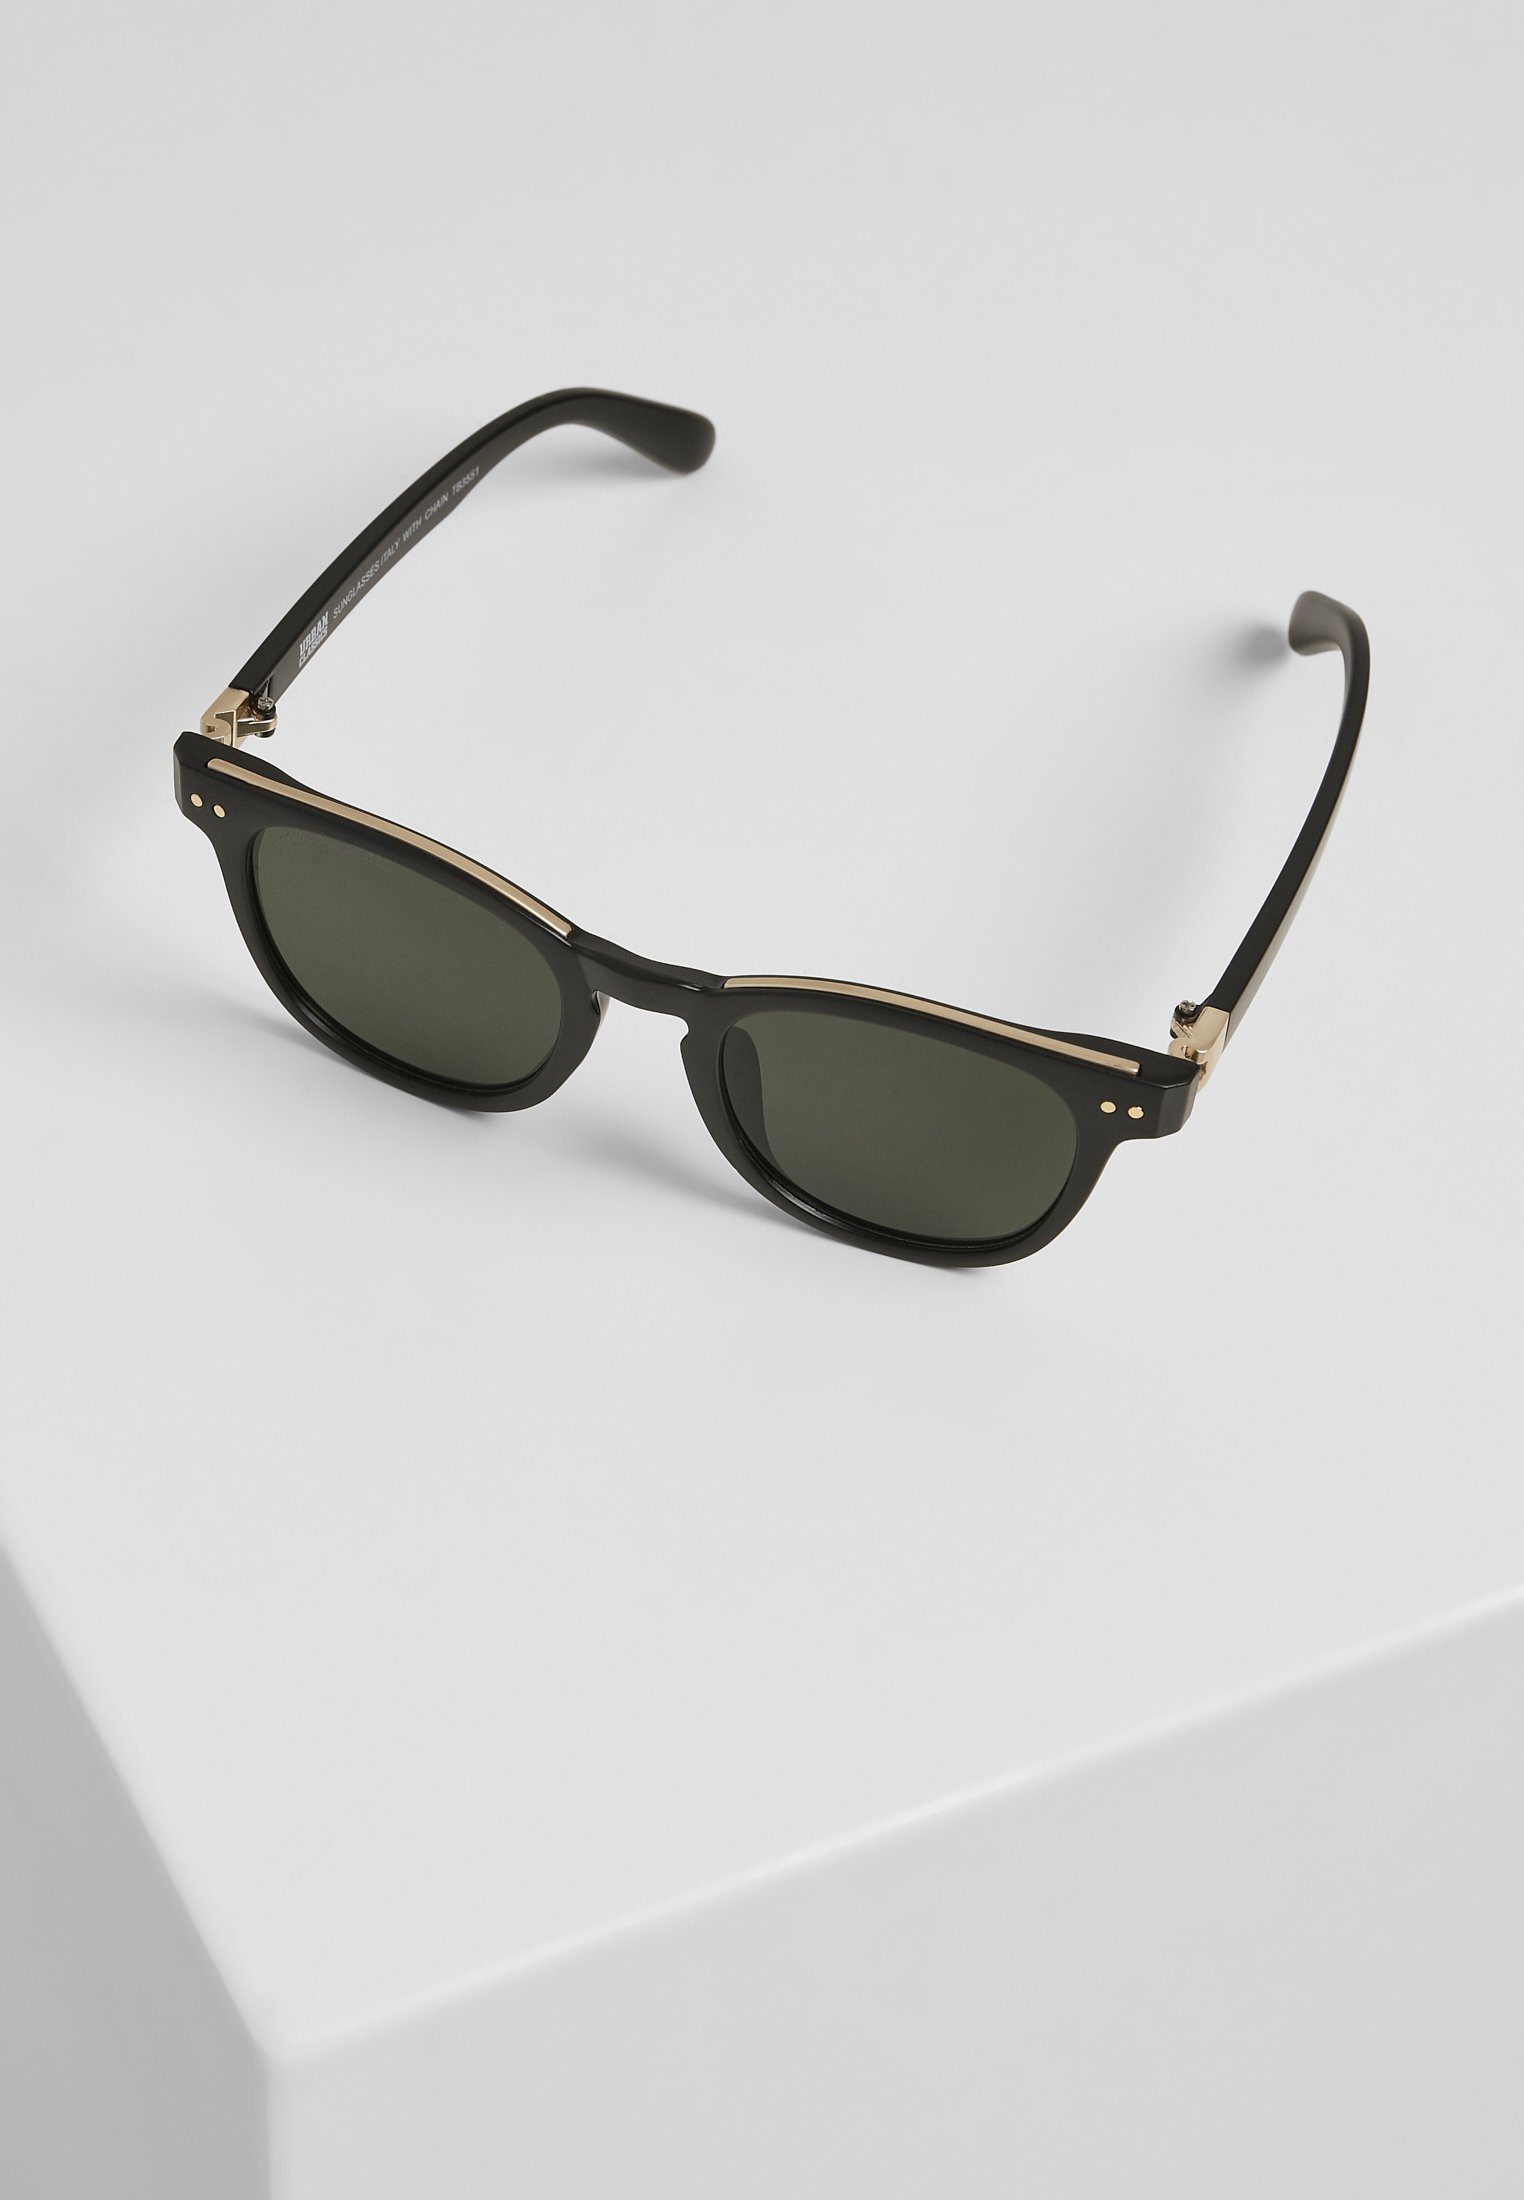 chain Italy CLASSICS with Sonnenbrille URBAN Unisex Sunglasses black/gold/gold